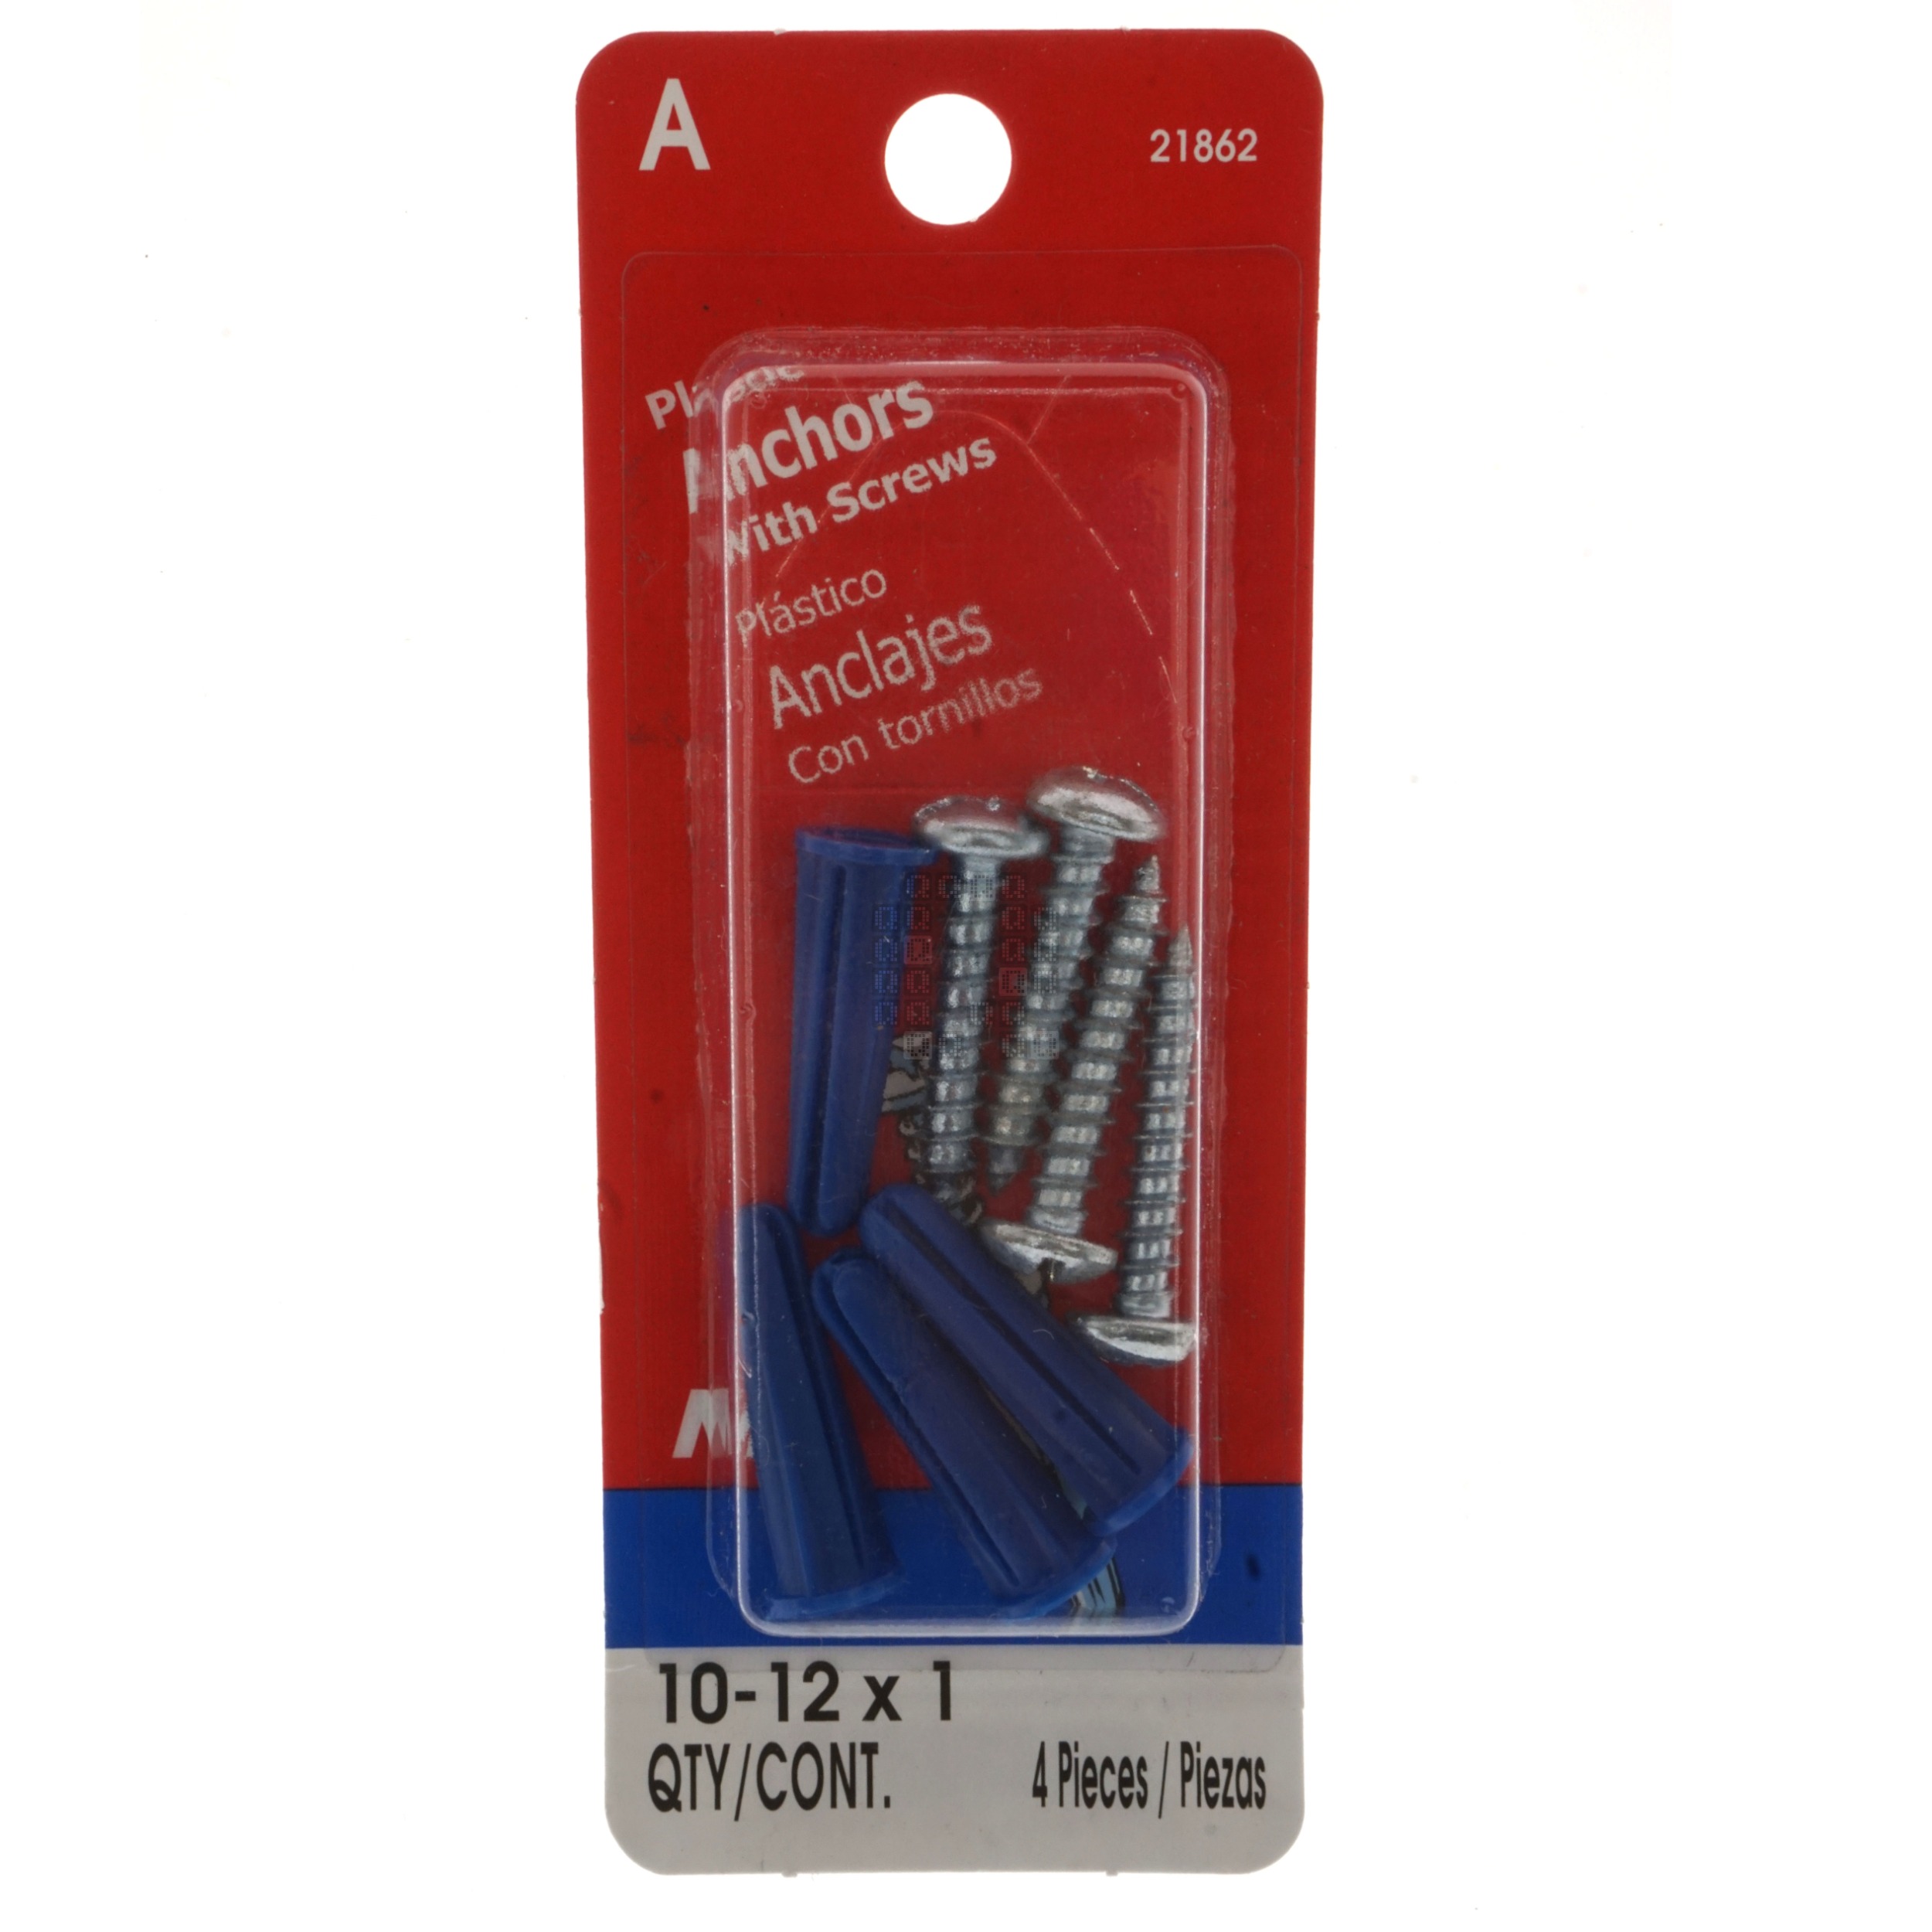 Midwest Fastener 21862 #10-12 x 1 Plastic Anchor Kit with Zinc Screws